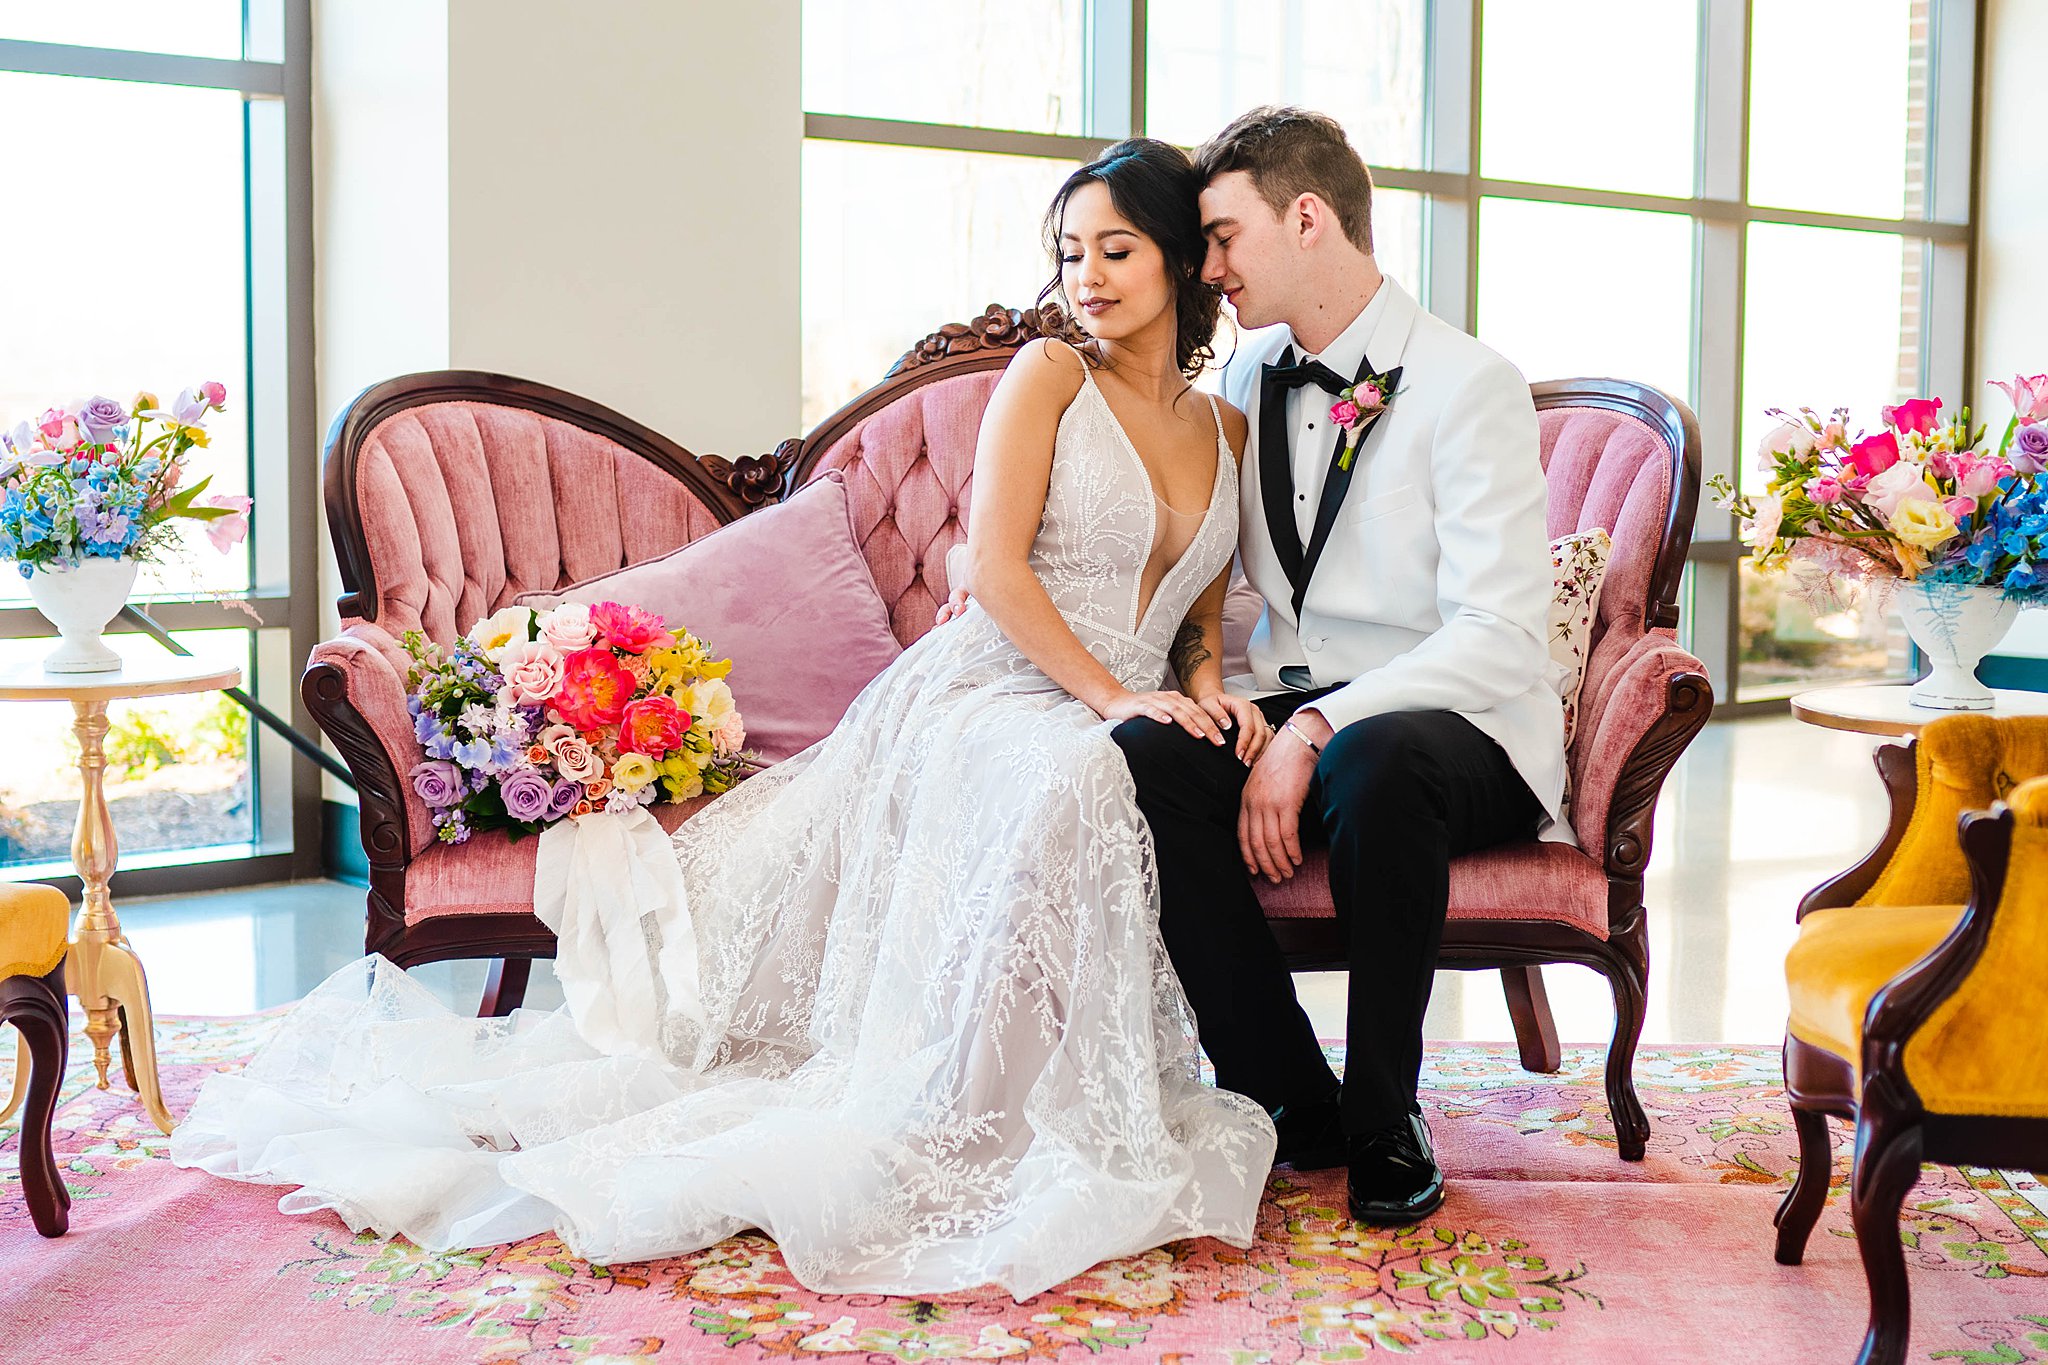 Newlyweds sit on a pink antique couch in a room with large windows and colorful flowers unique wedding venues dayton ohio